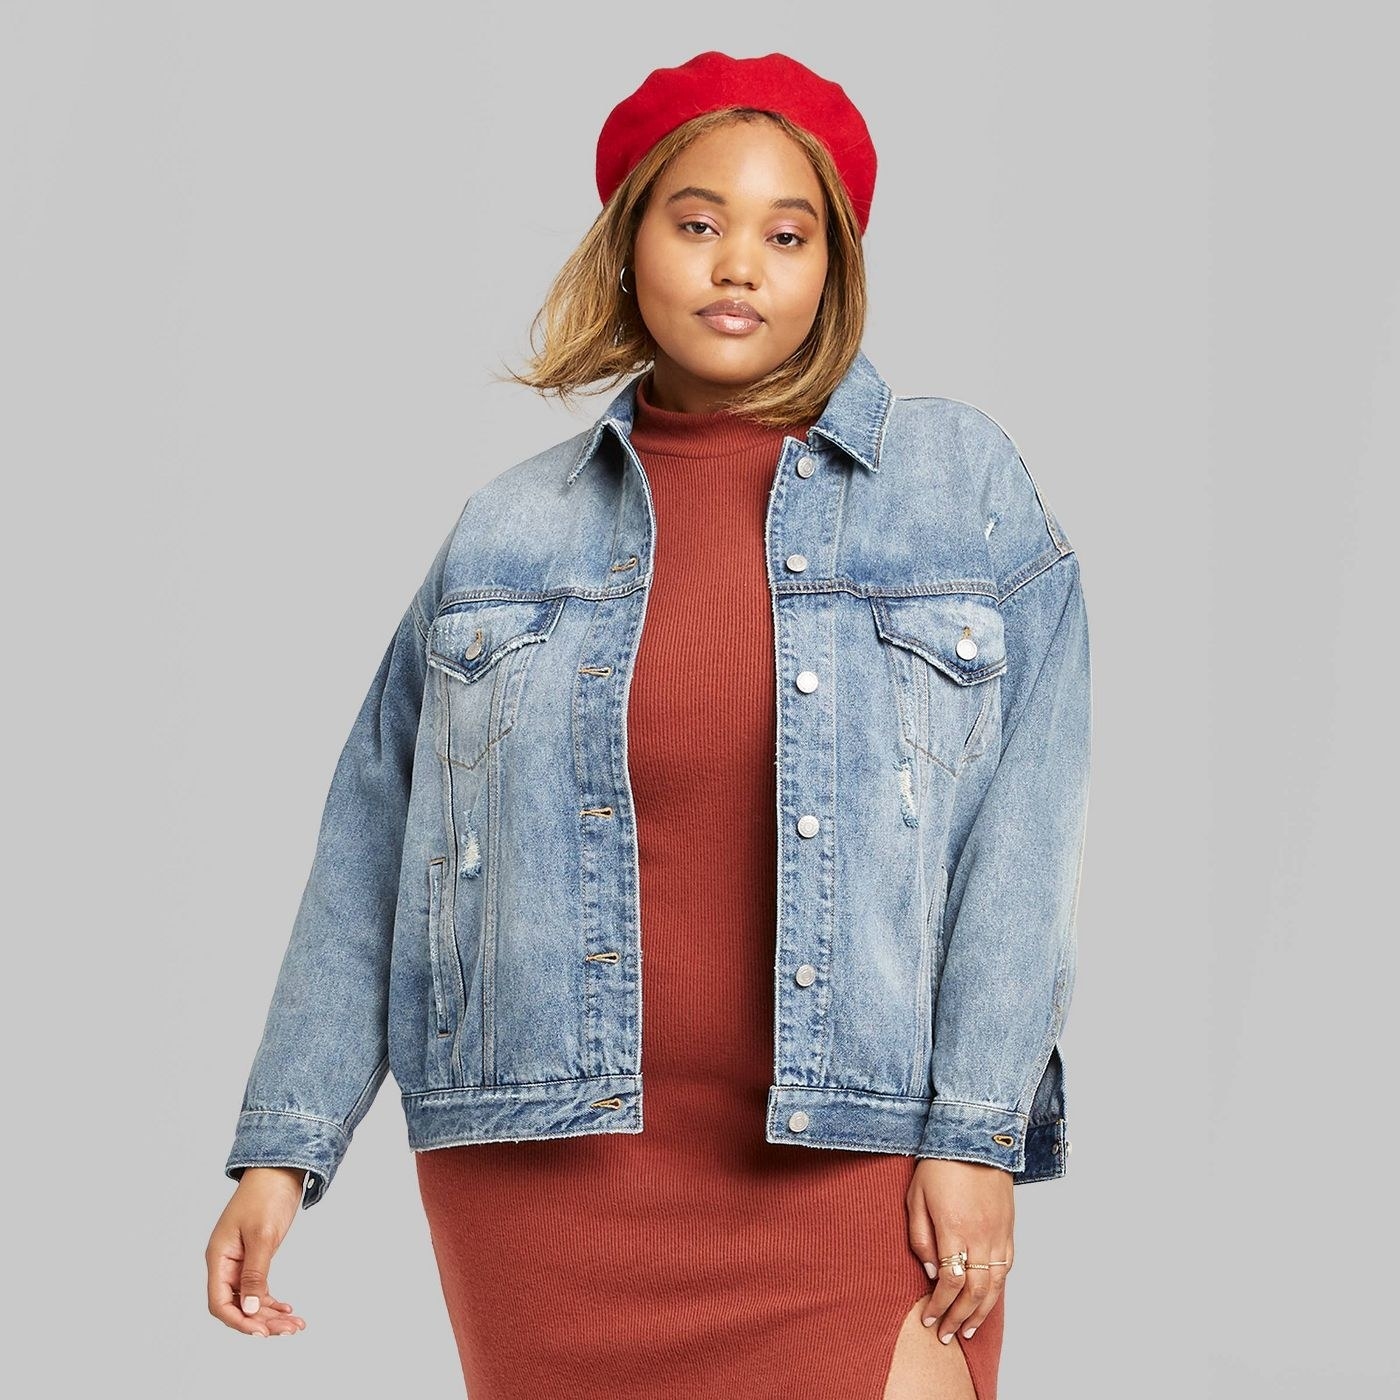 Model medium wash jean jacket with pockets on the bust area